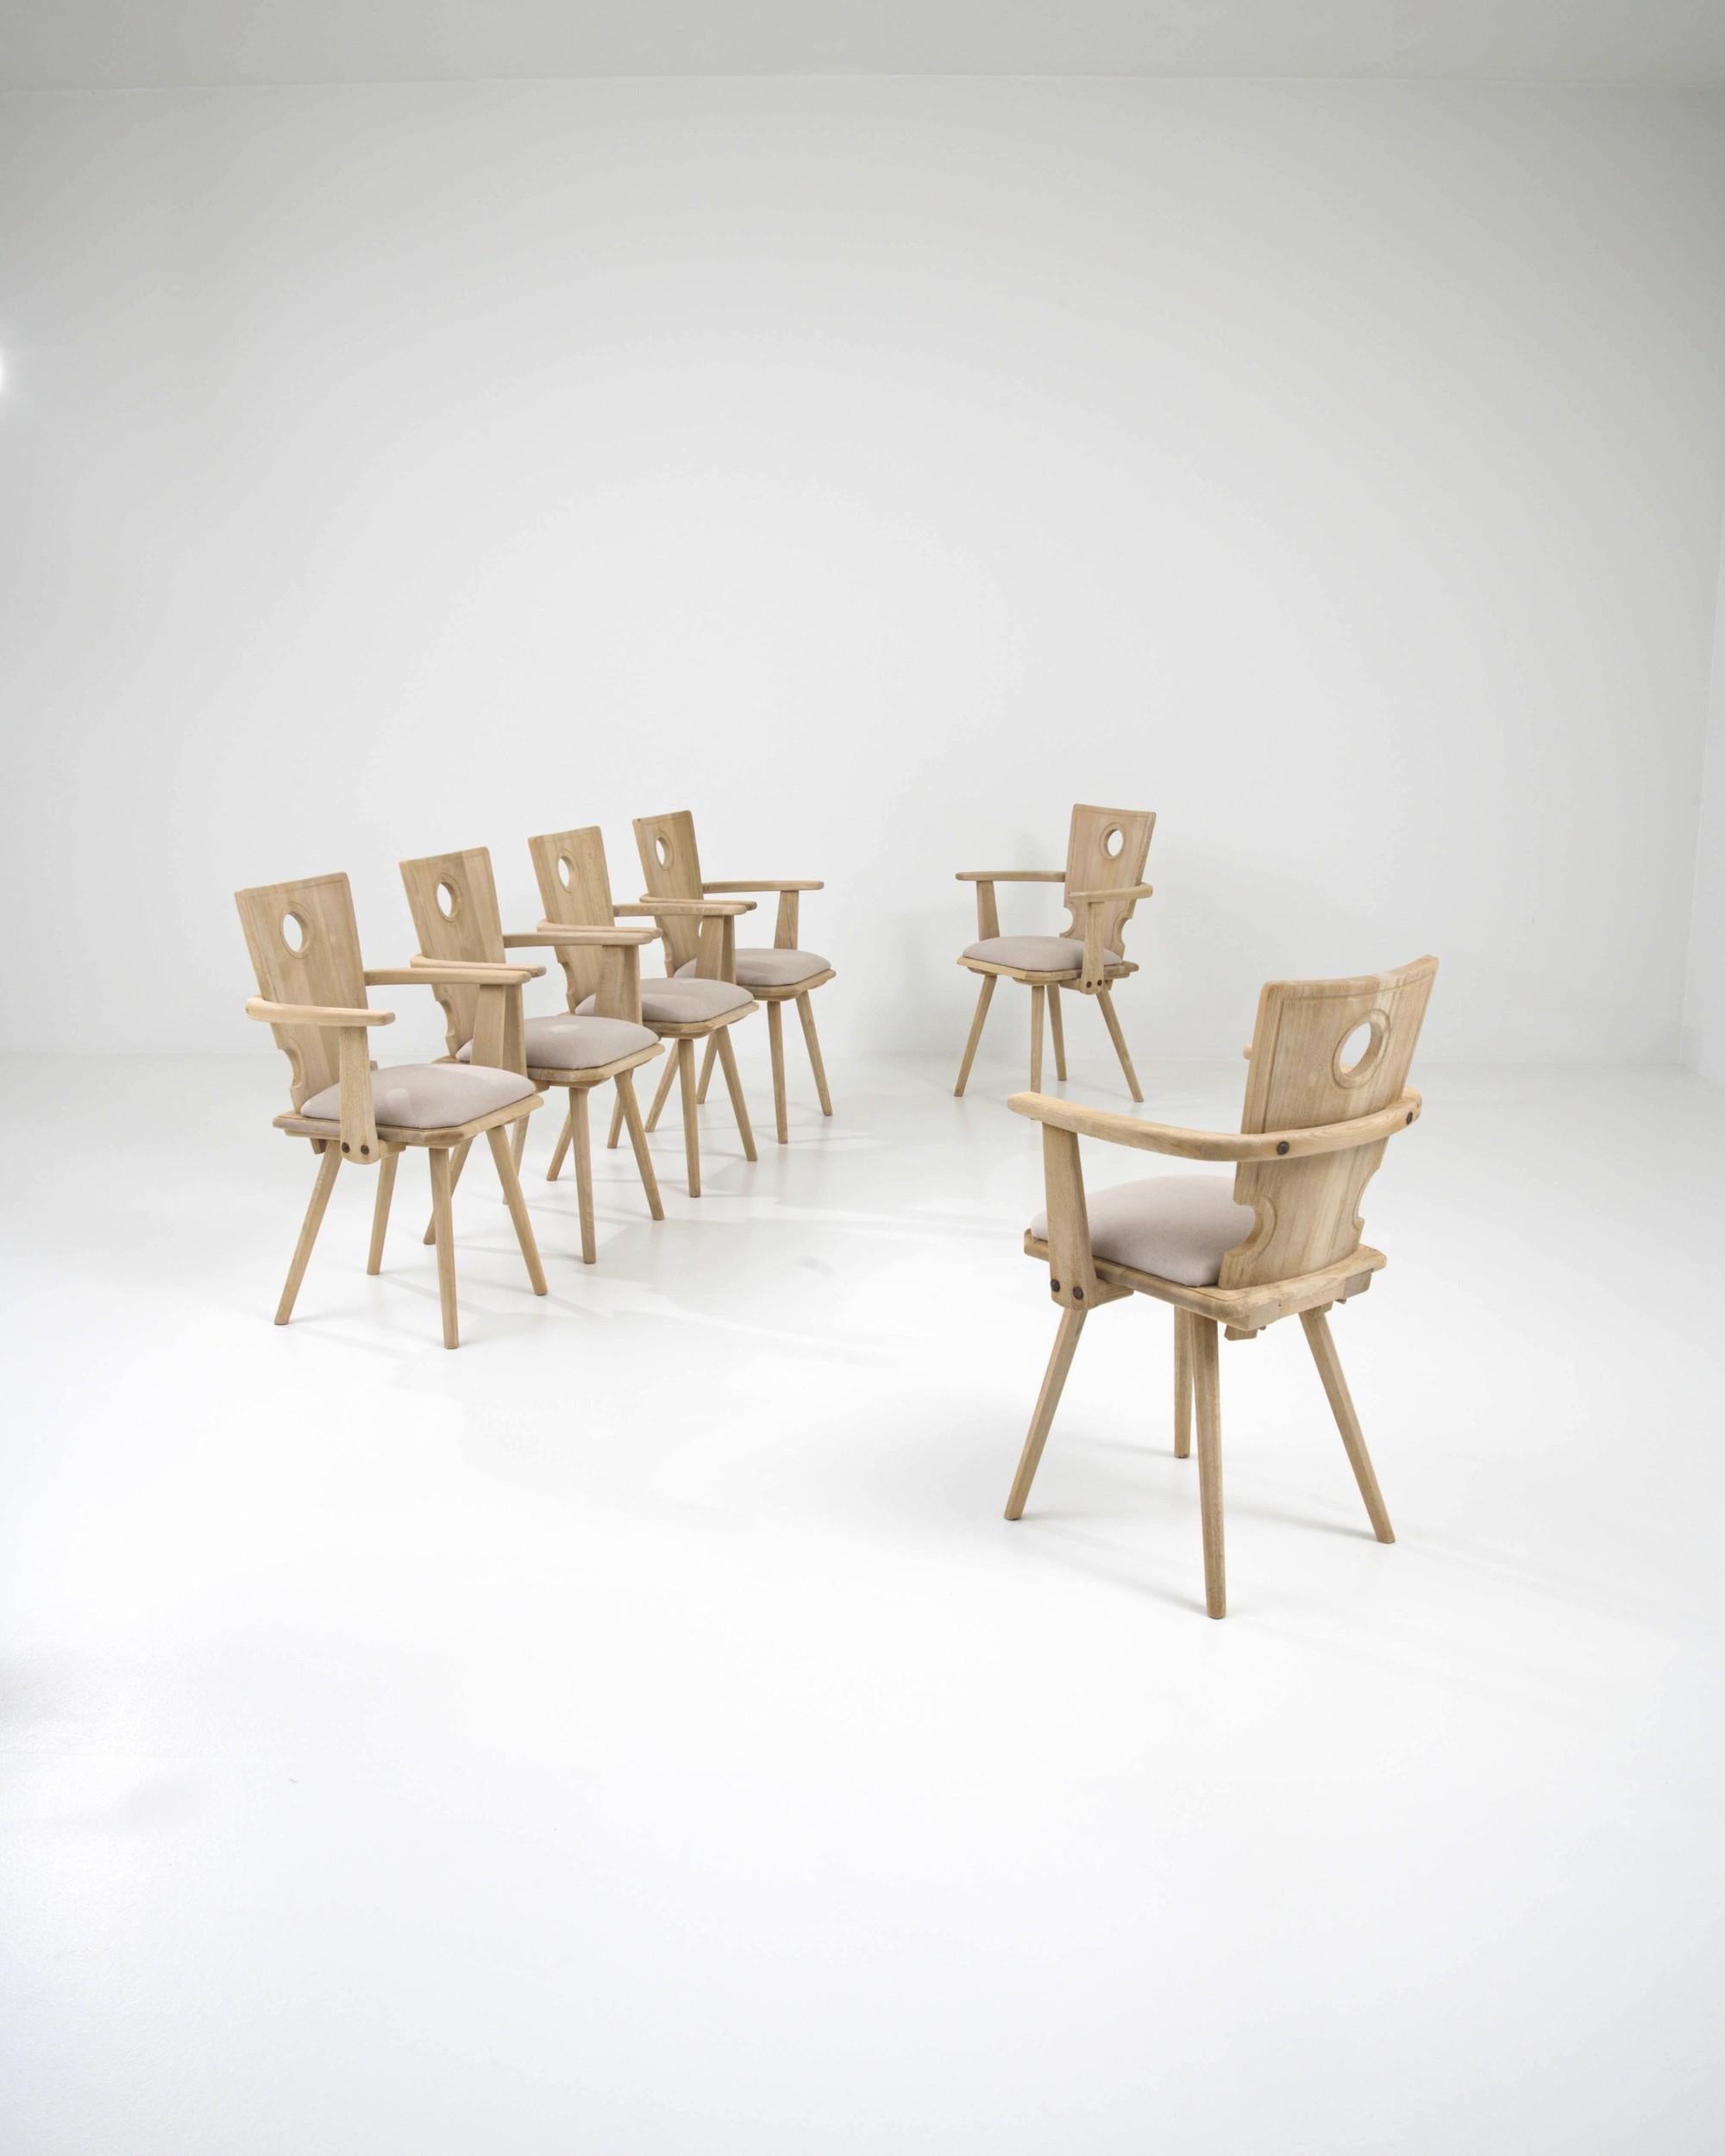 A pale hue and refined country silhouette give this vintage set of six wooden dining chairs a homey, serene character. Made in Central Europe in the 20th century, the form is inspired by traditional farmhouse chairs — with a touch of the